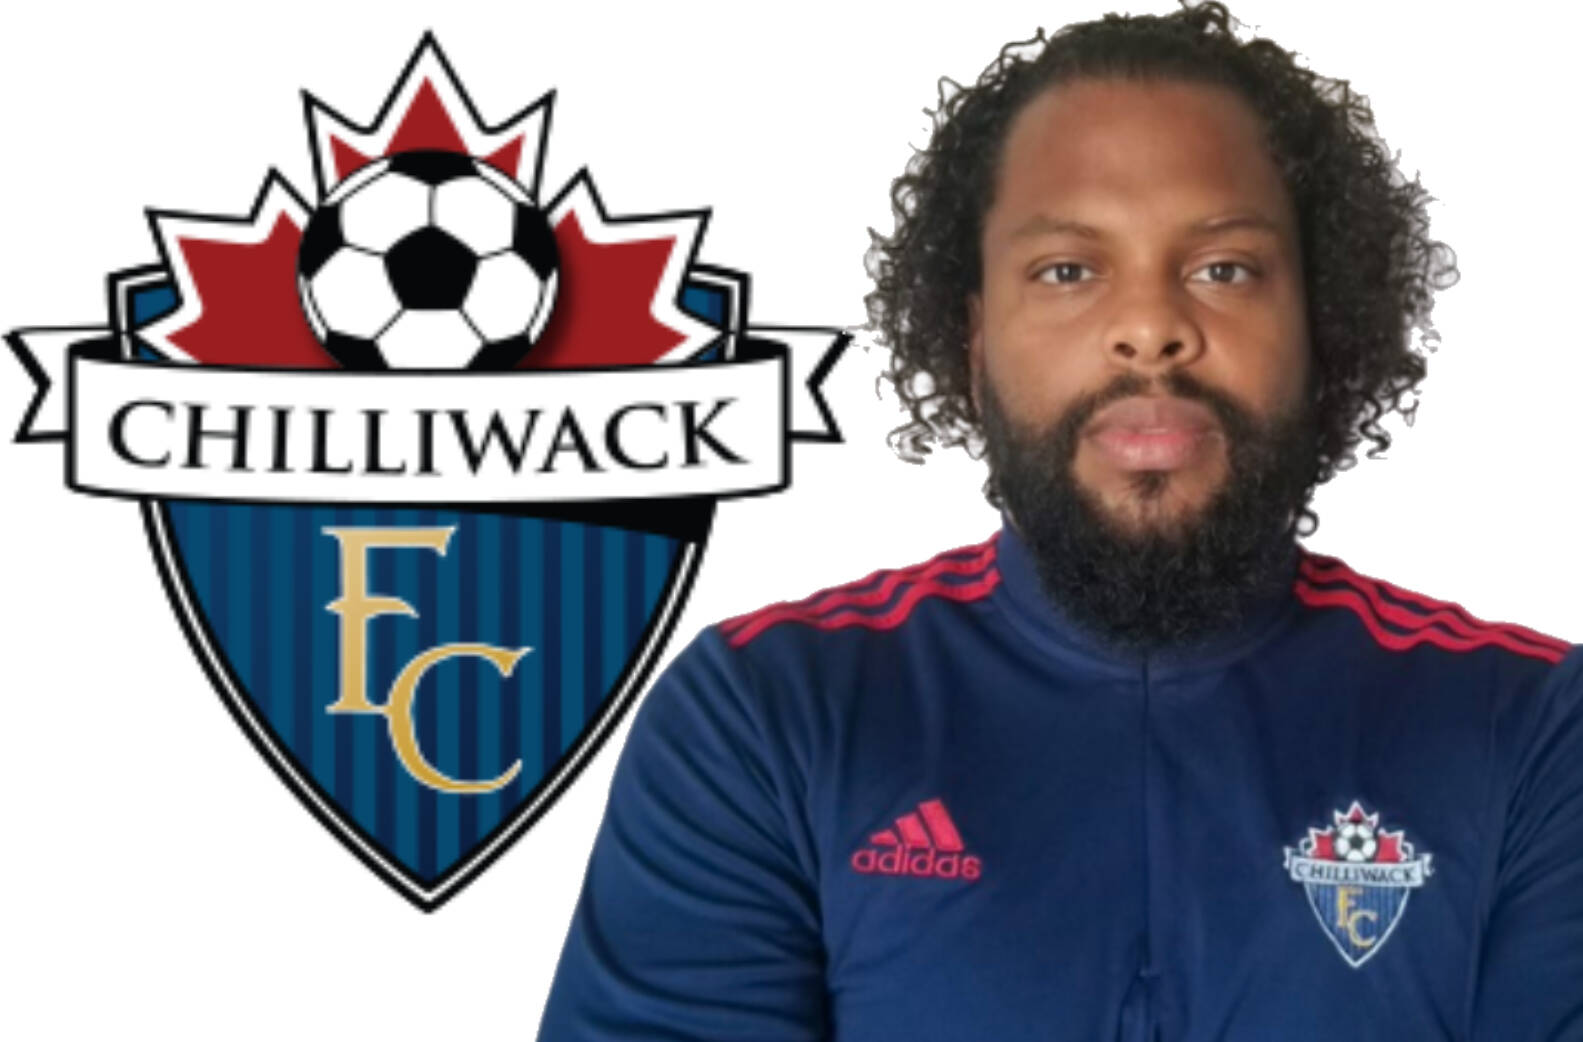 Roger Torres-Jaramillo was hired as Chilliwack FC’s technical director in September, 2021.